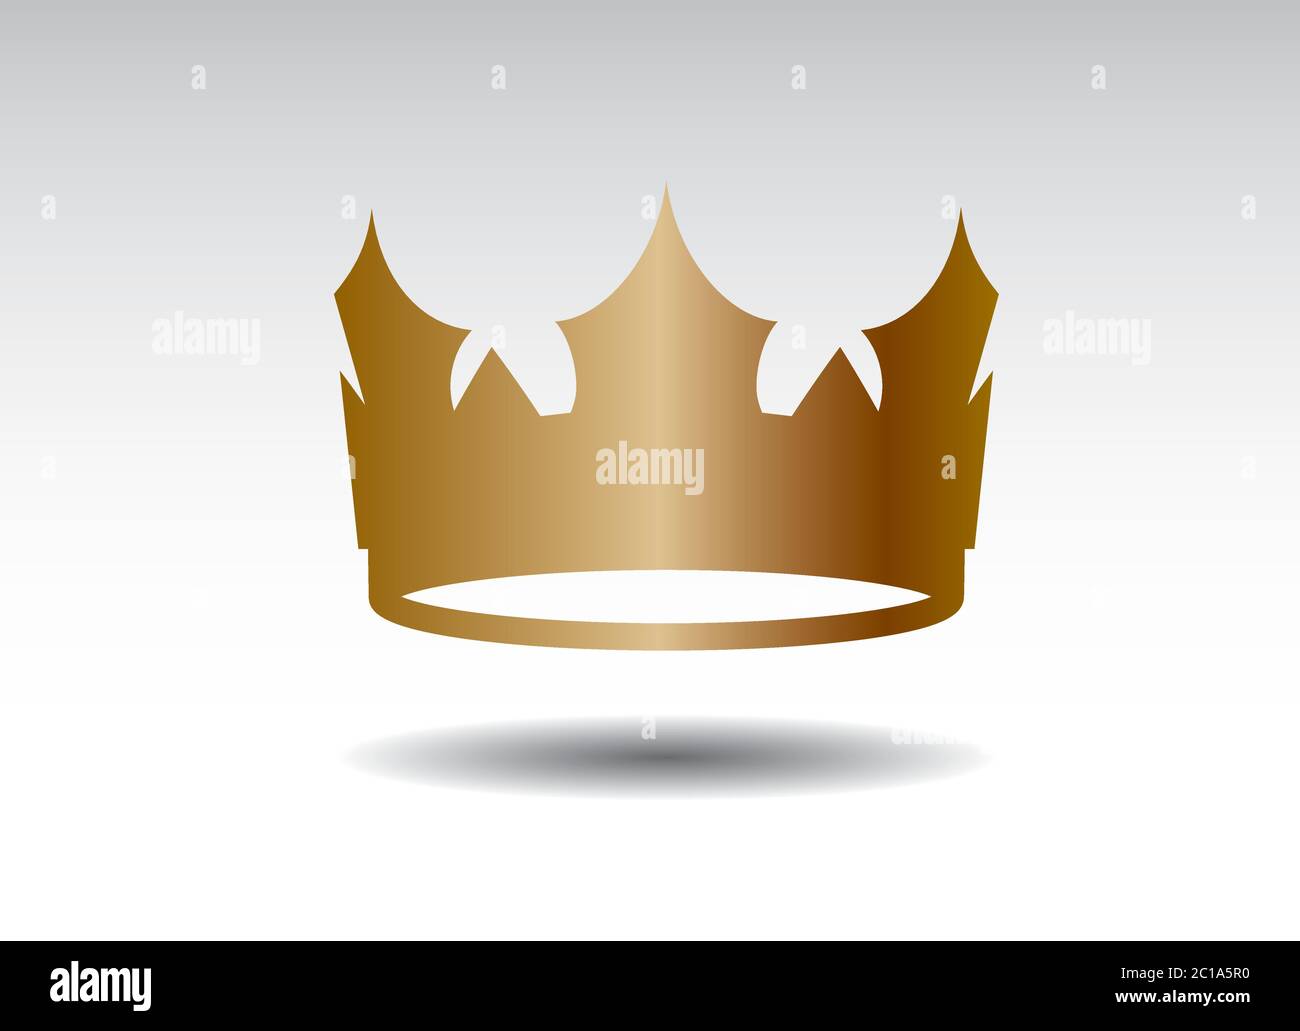 Luxury vector icon. Vector outline king crowns and coronation emblems. Stock Vector